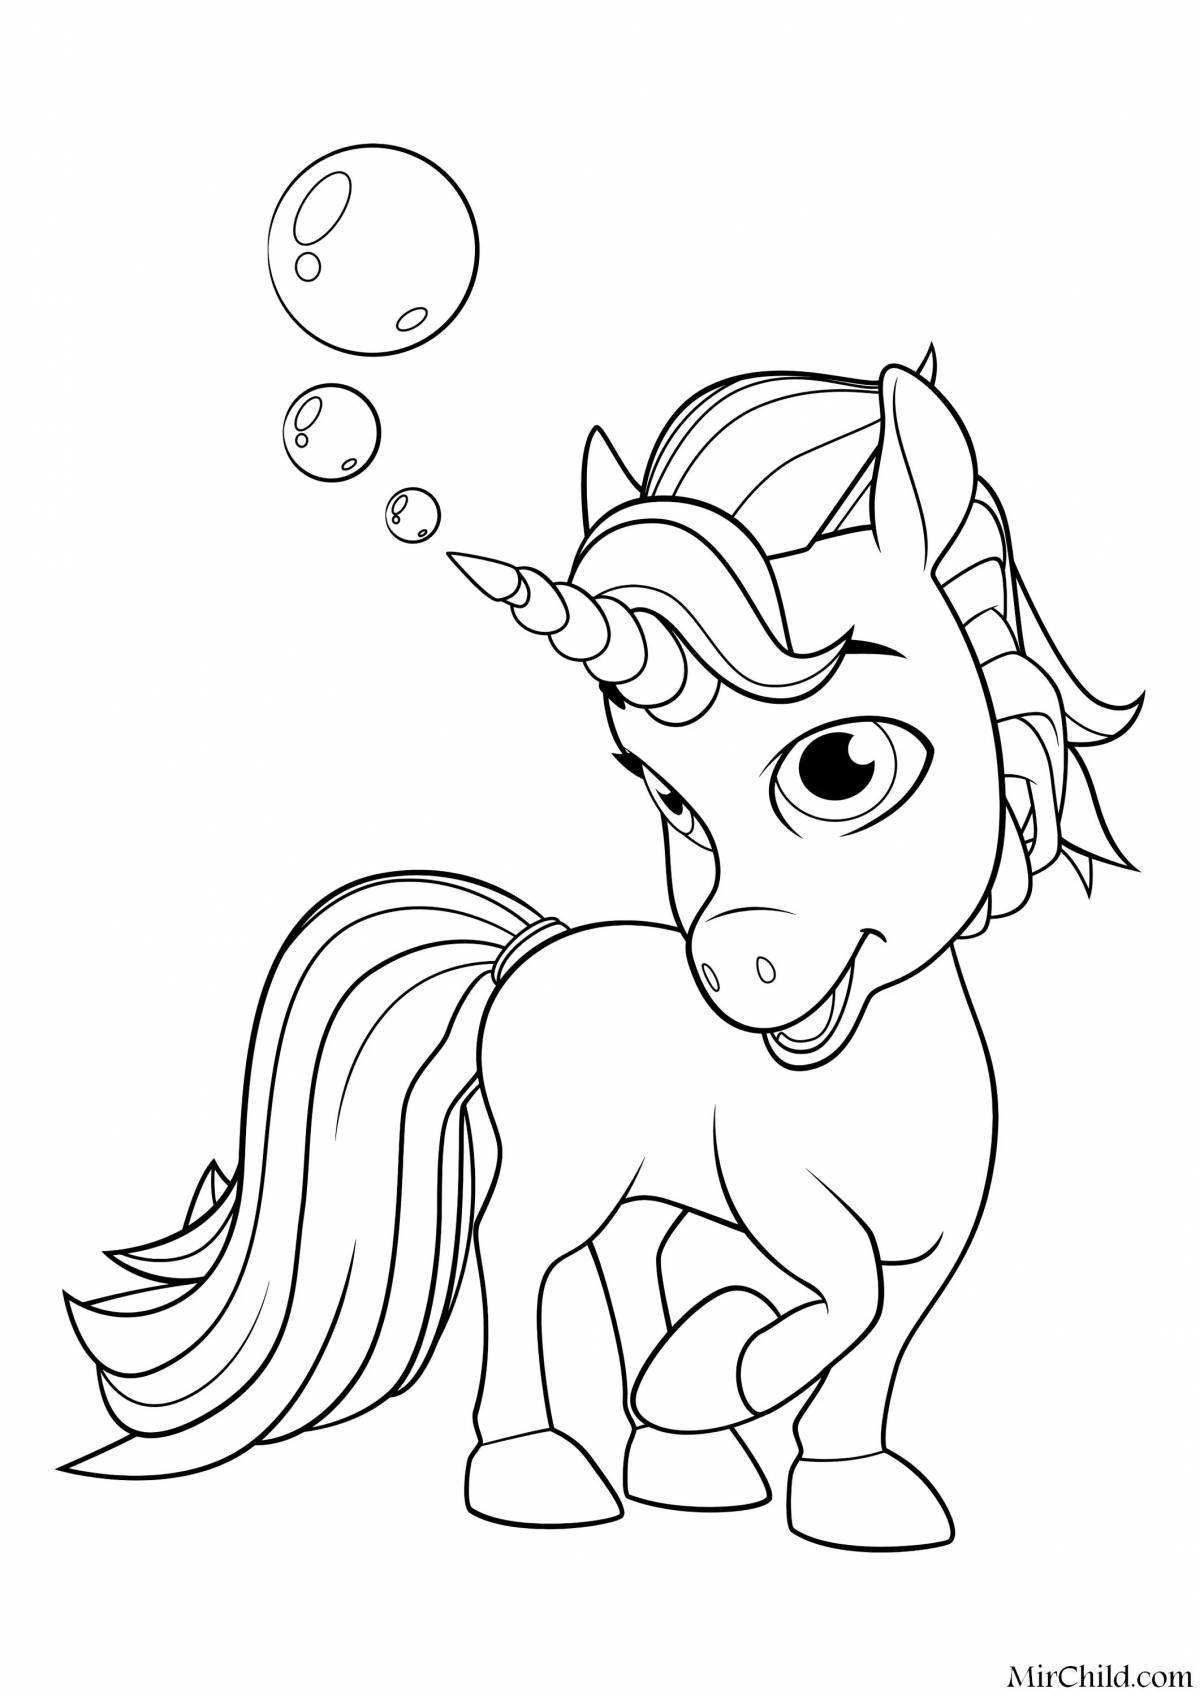 Coloring page live Hudsons